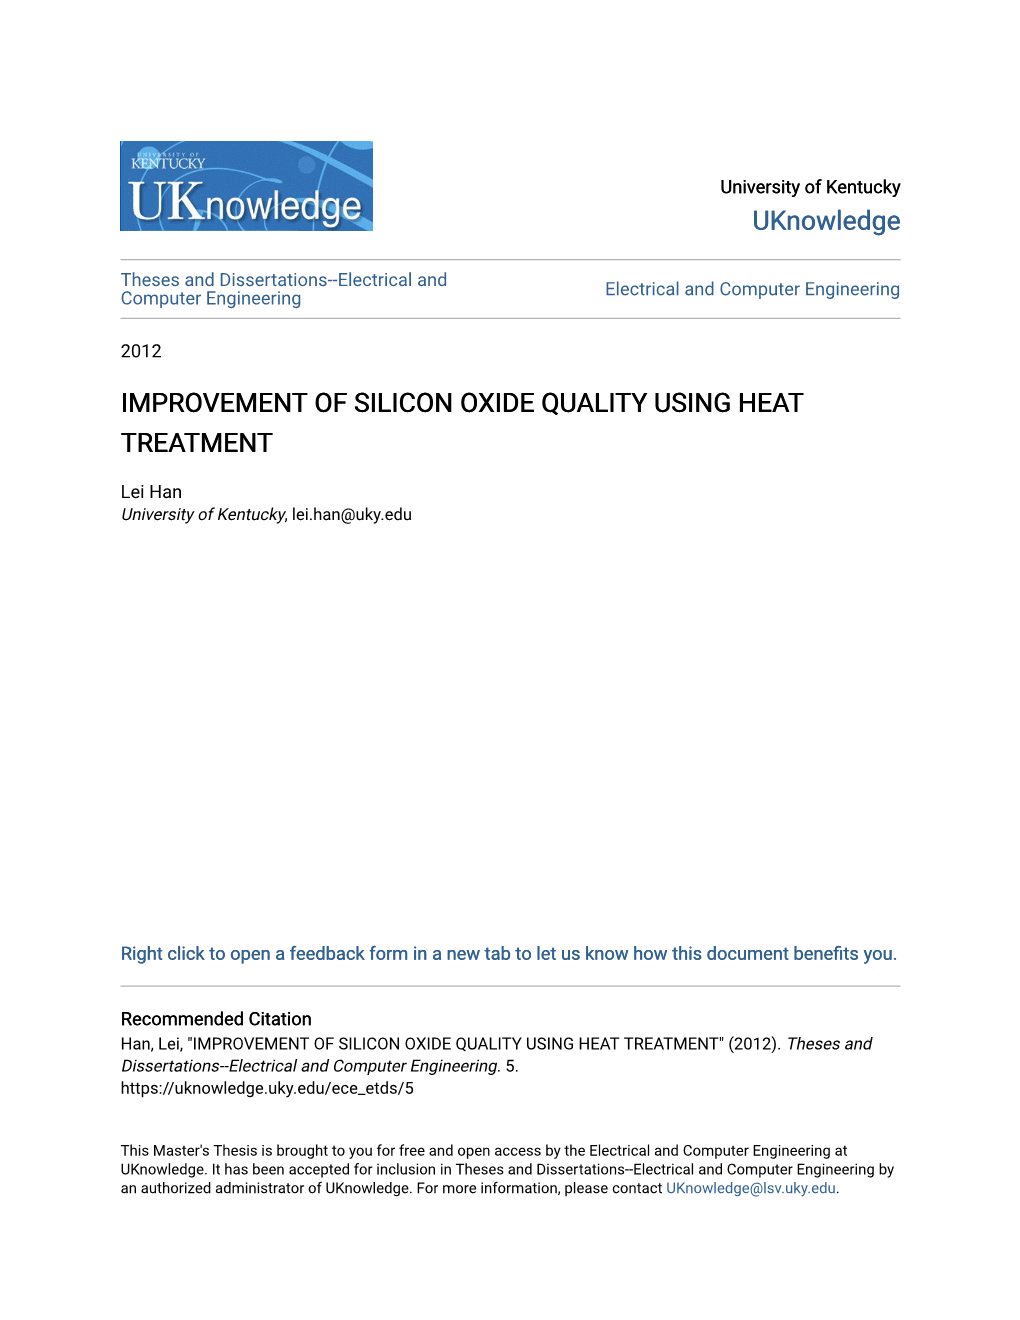 Improvement of Silicon Oxide Quality Using Heat Treatment